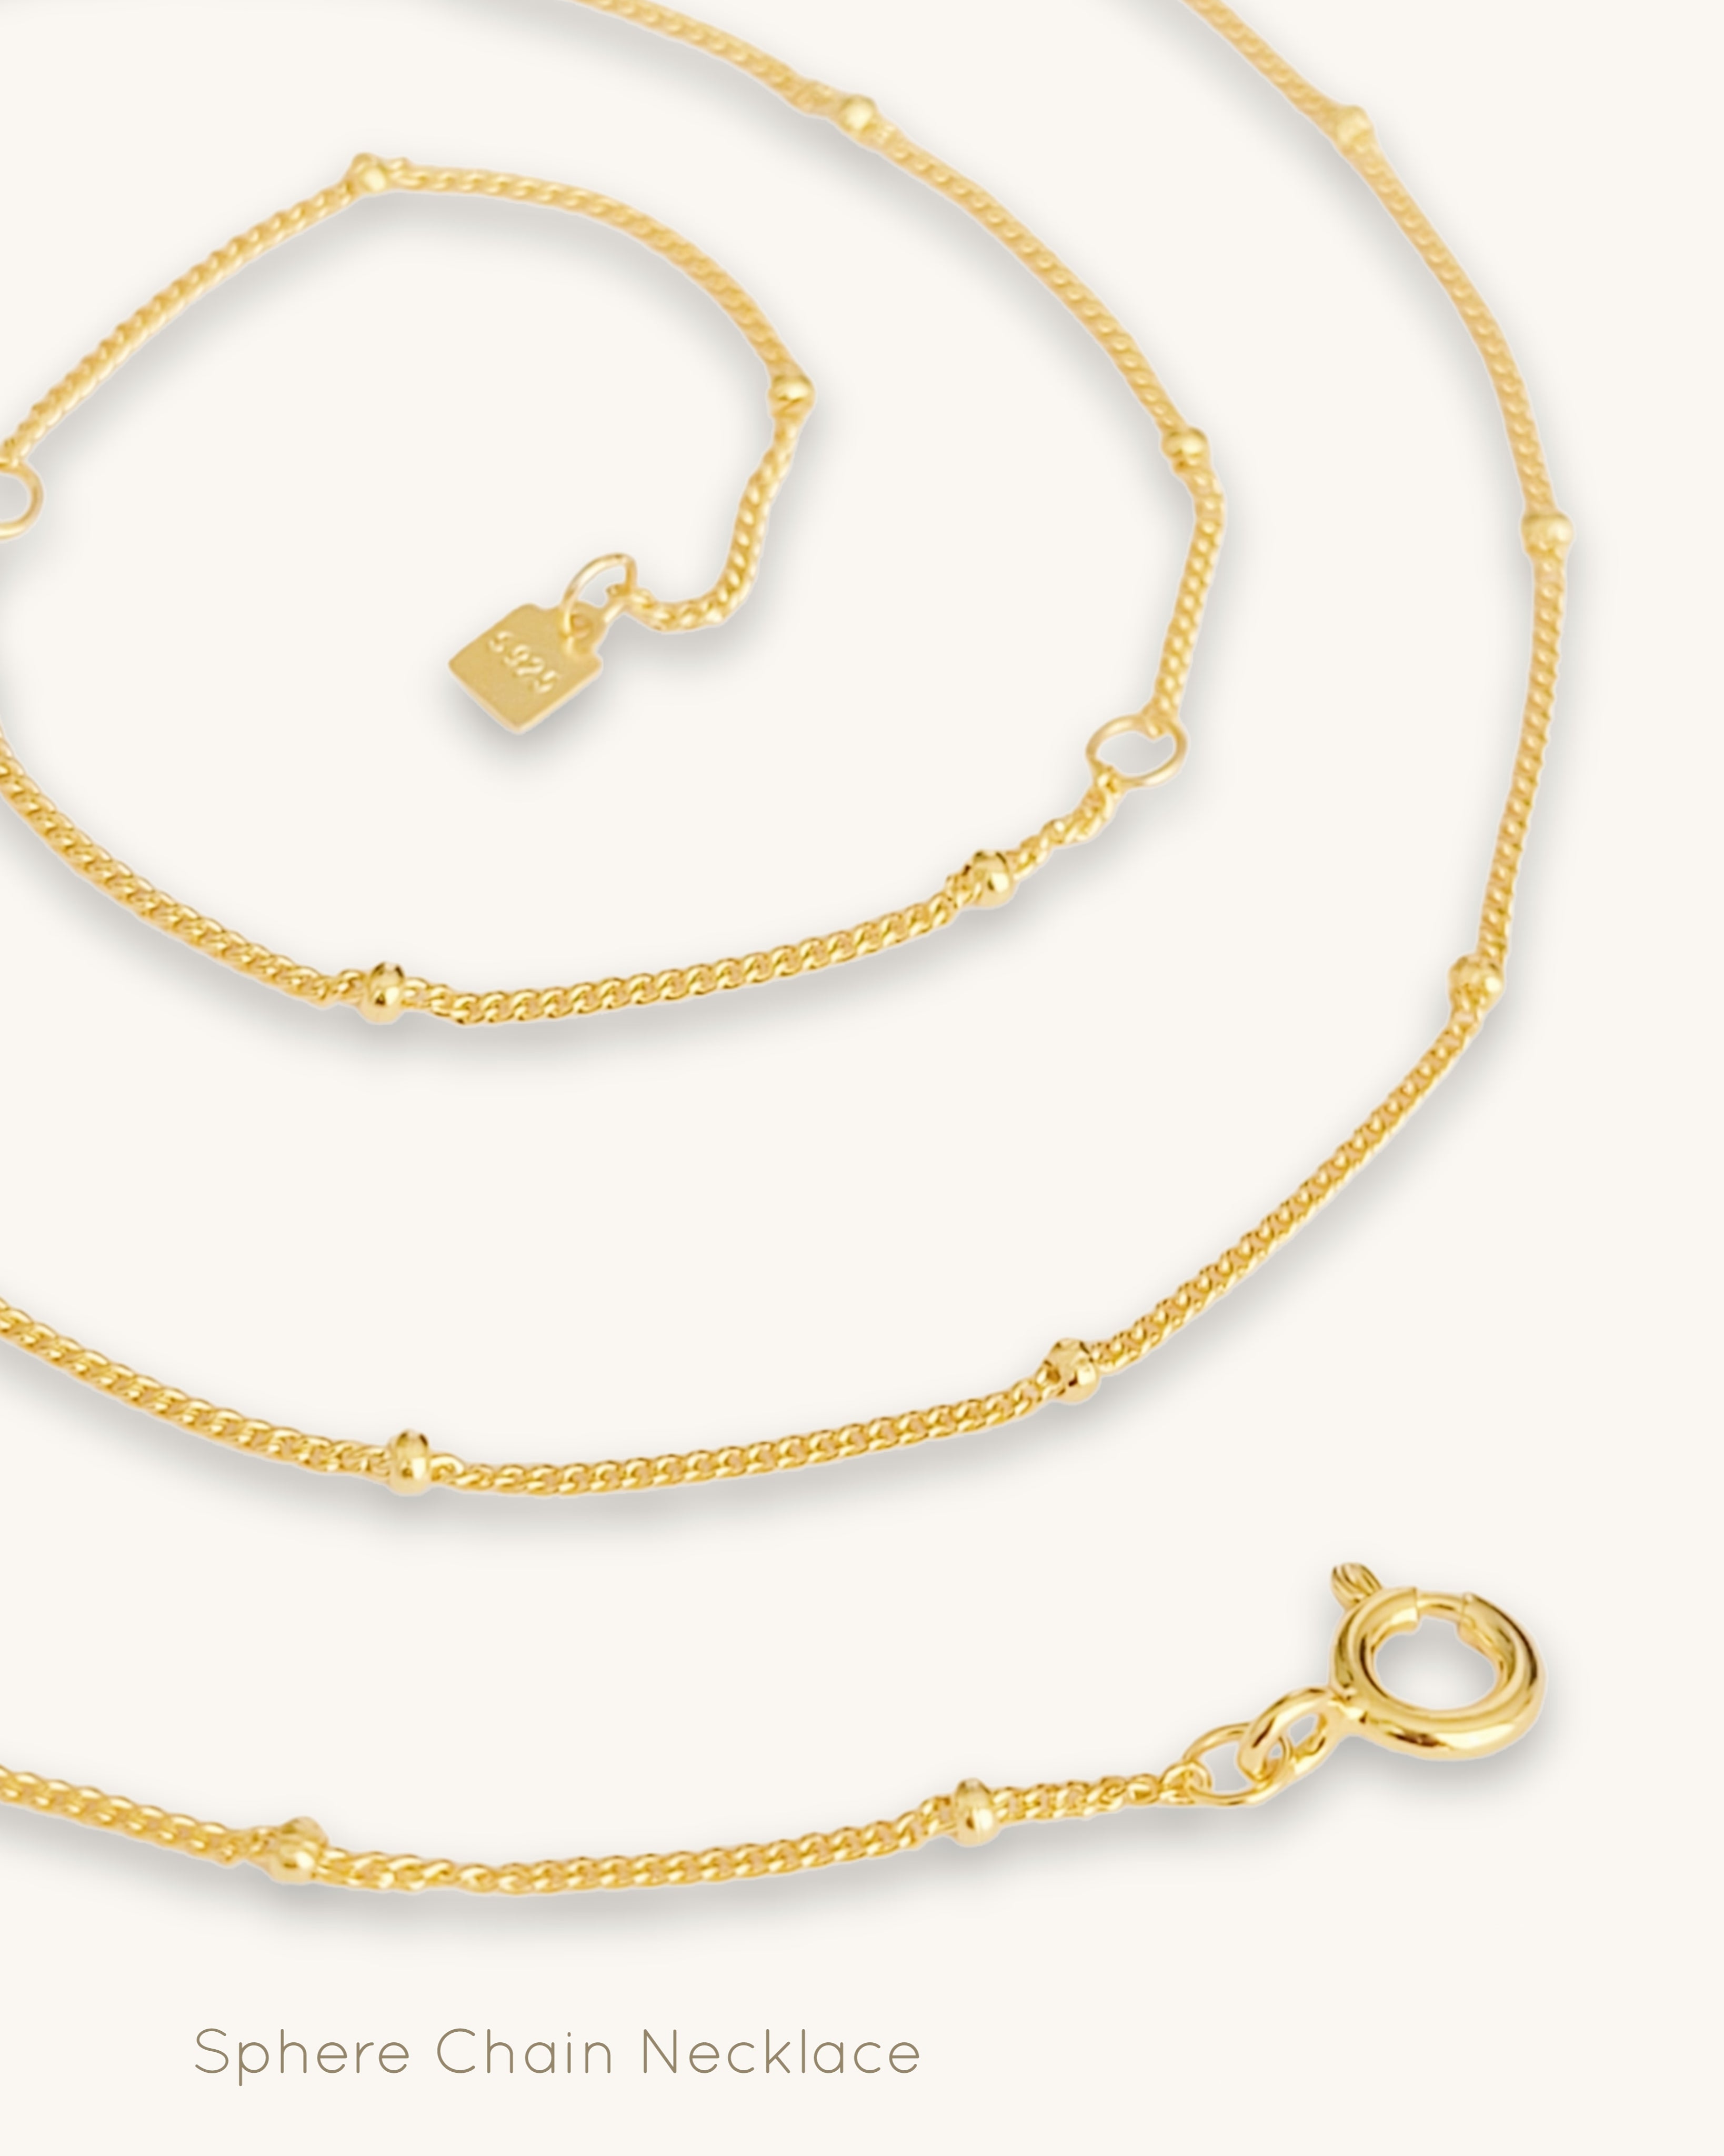 gold sphere chain necklace uk